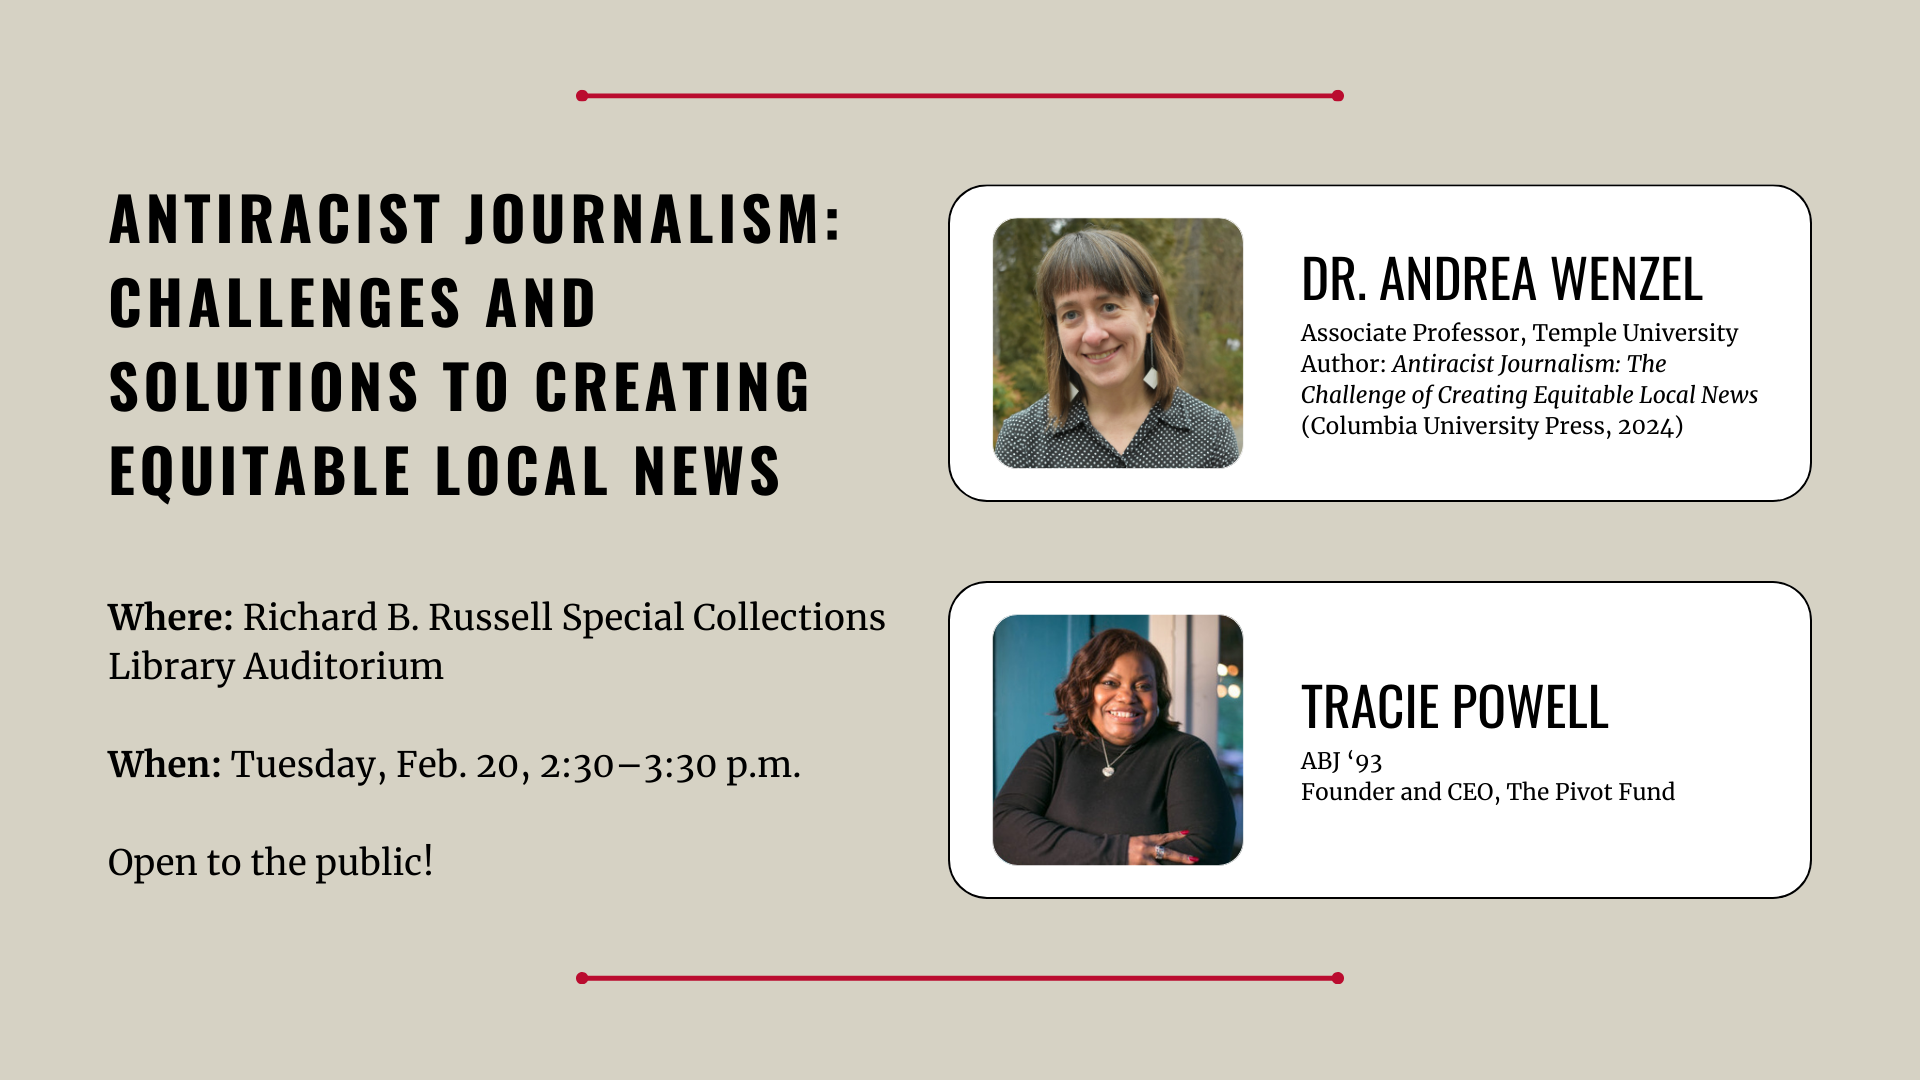 A digital flyer advertising the "Antiracist Journalism: Challenges and Solutions to Creating Equitable Local News" talk.